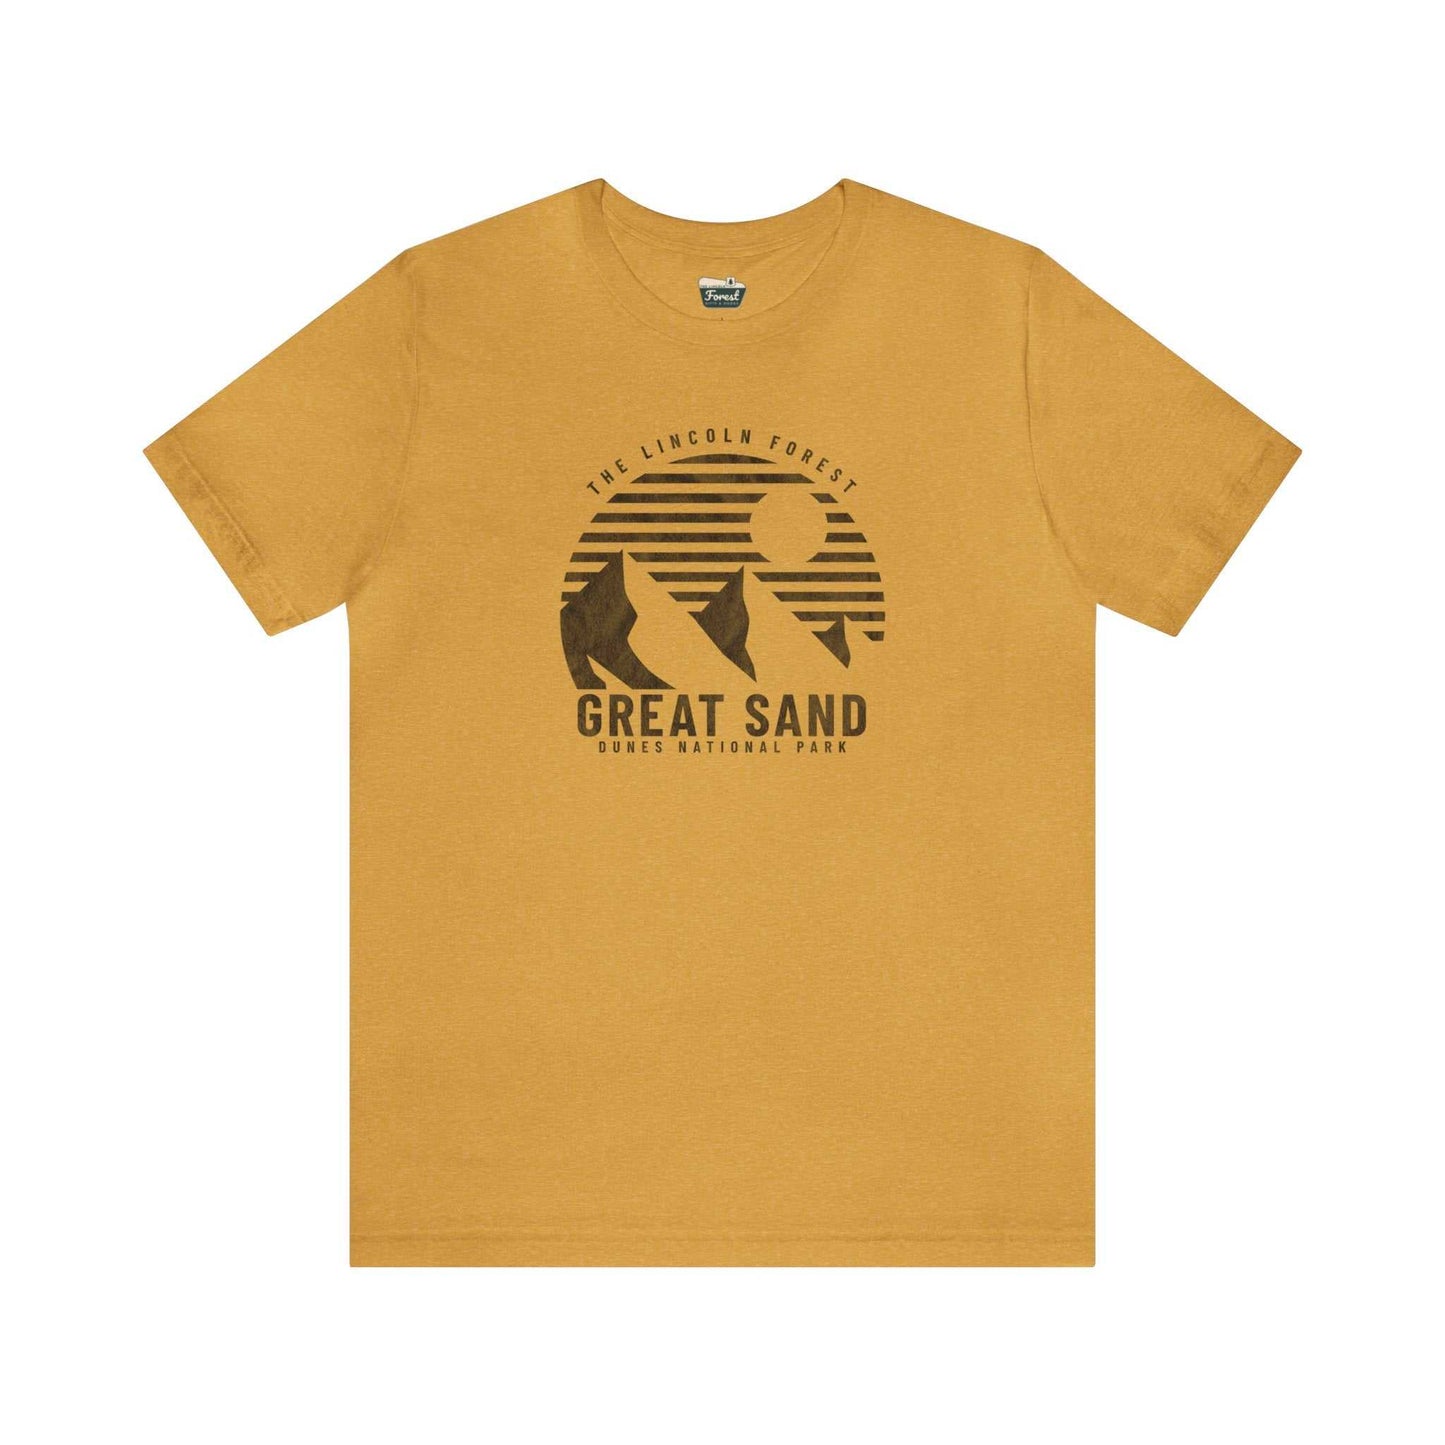 Great Sand Dunes National Park ShirtDetails:
- 100% jersey cotton - light weight ultra soft fabric - unisex sizing
The Lincoln Forest cares deeply about the planet and creating a business that gives ba